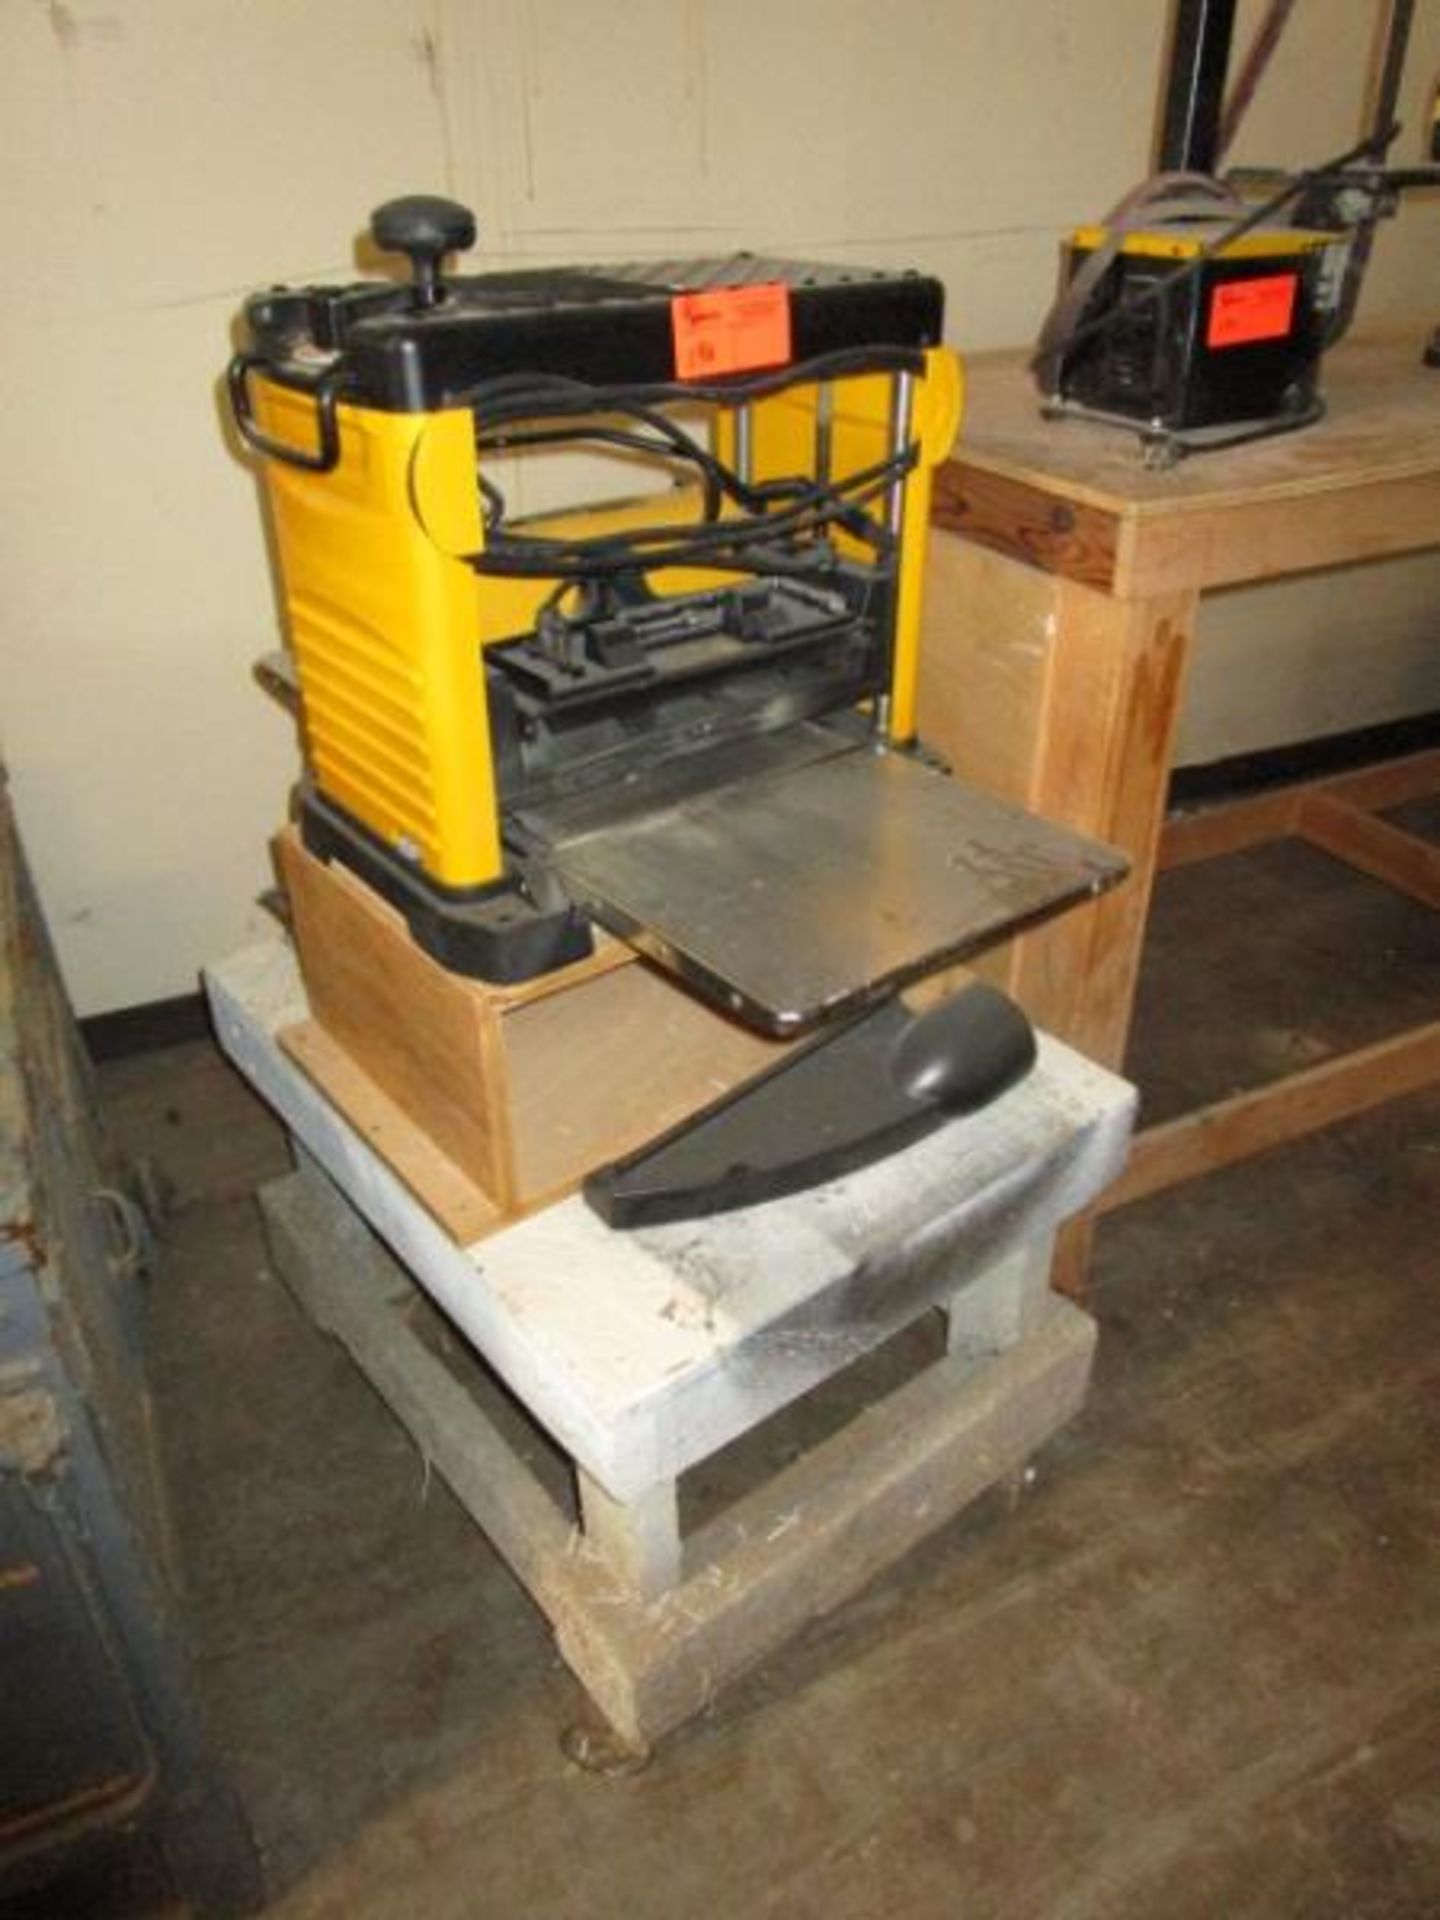 Thickness Planer w/ Stant by Delta, Model: DW733 - Image 4 of 7